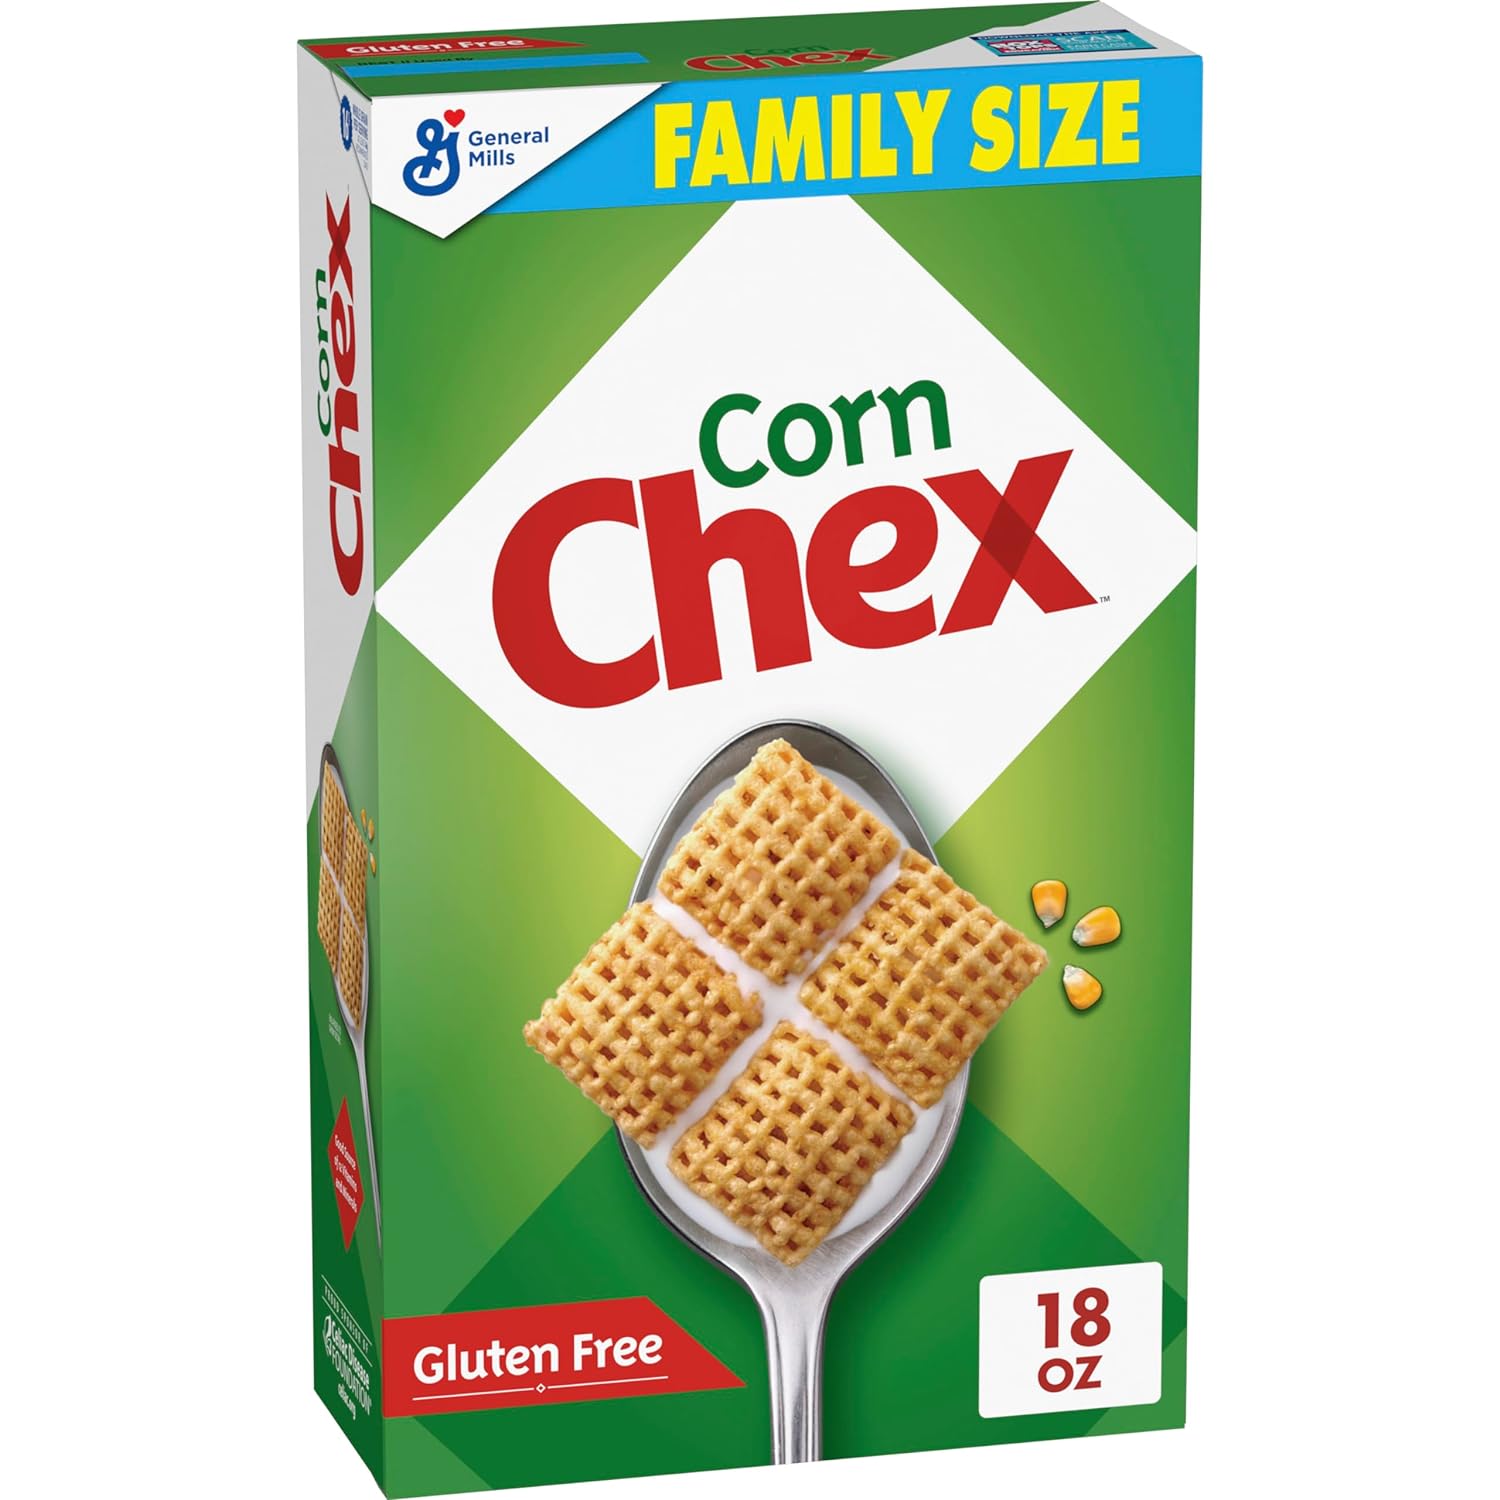 Corn Chex Gluten Free Breakfast Cereal, Made with Whole Grain, Family Size, 18 oz